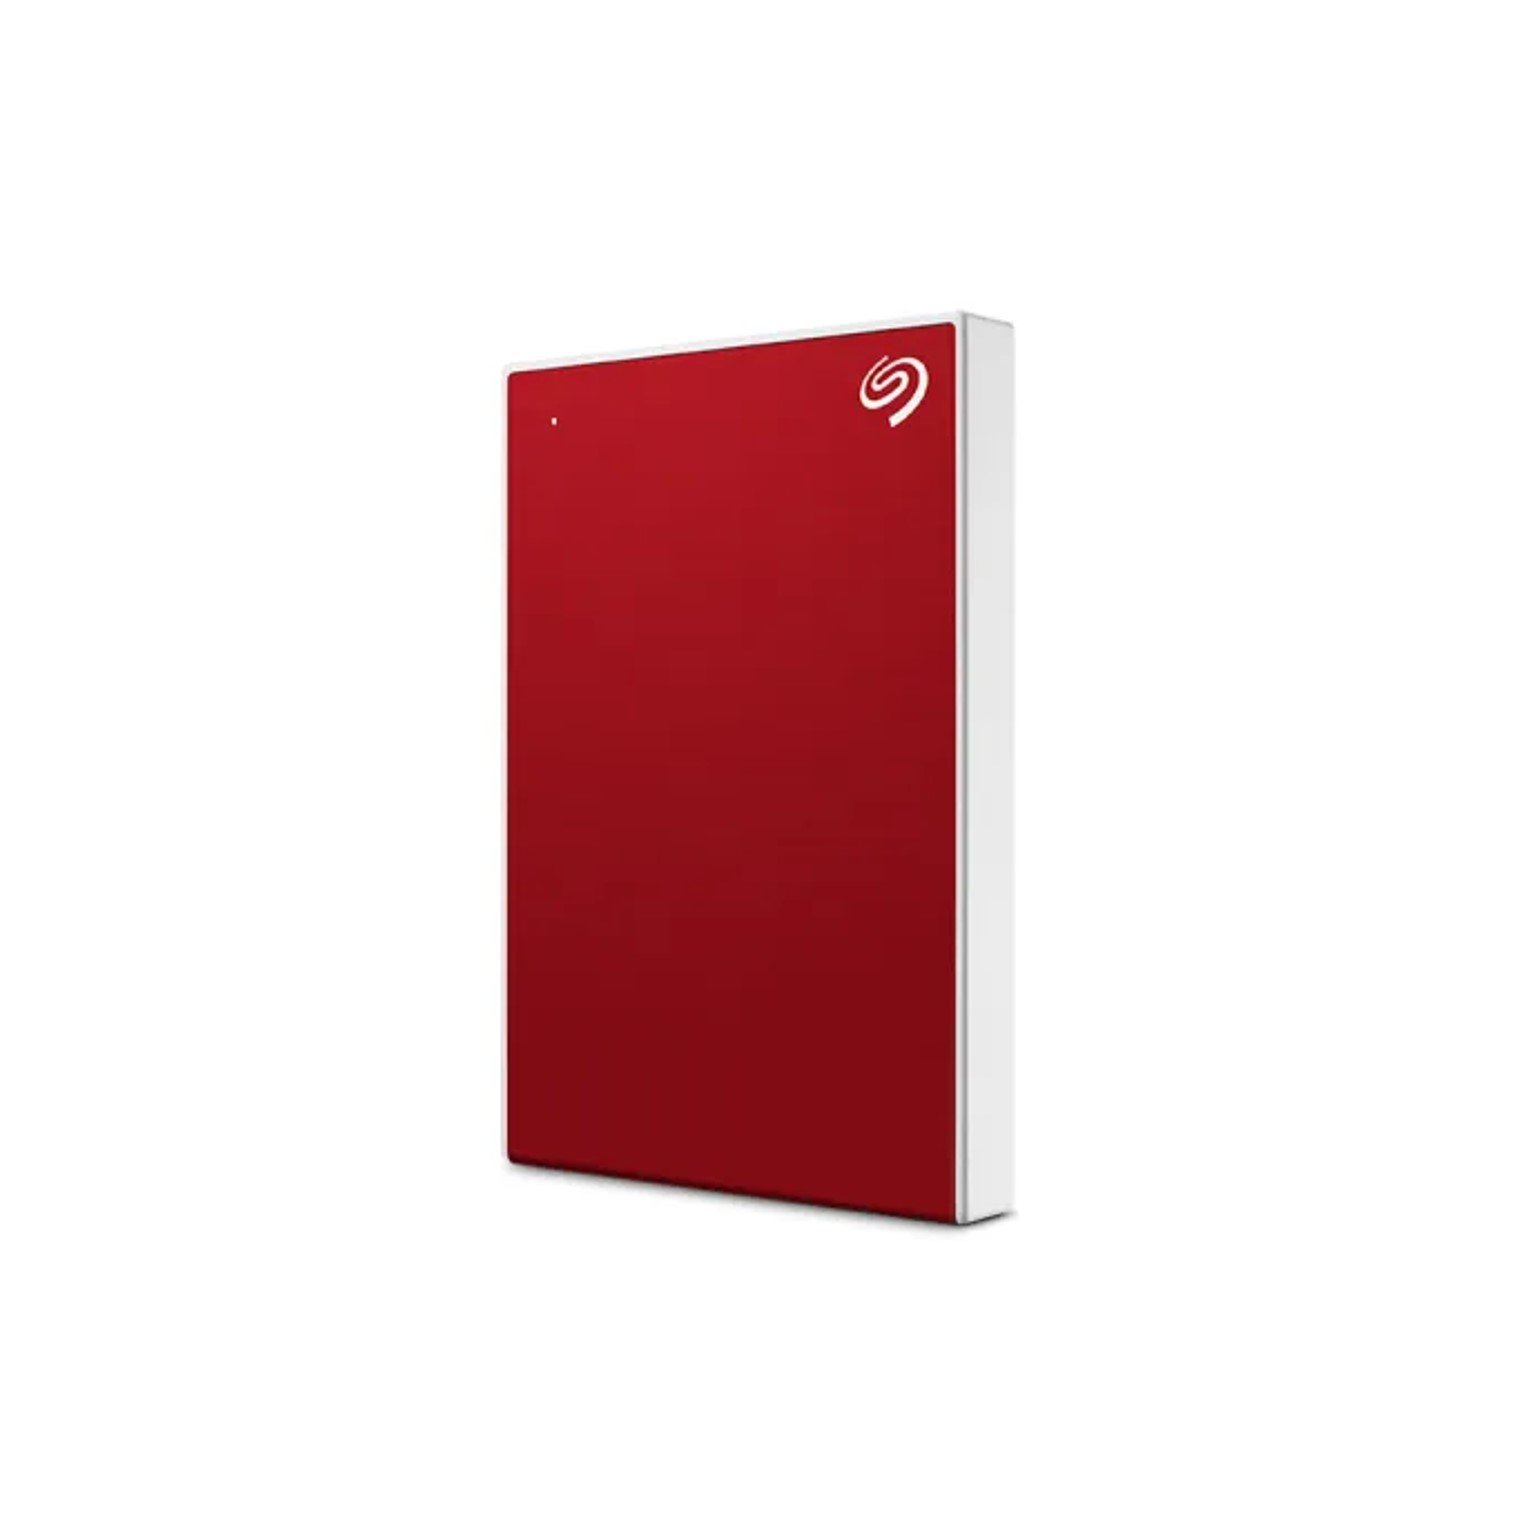 Seagate One Touch HDD with Password  NEW 4TB - USB3.0 - Red